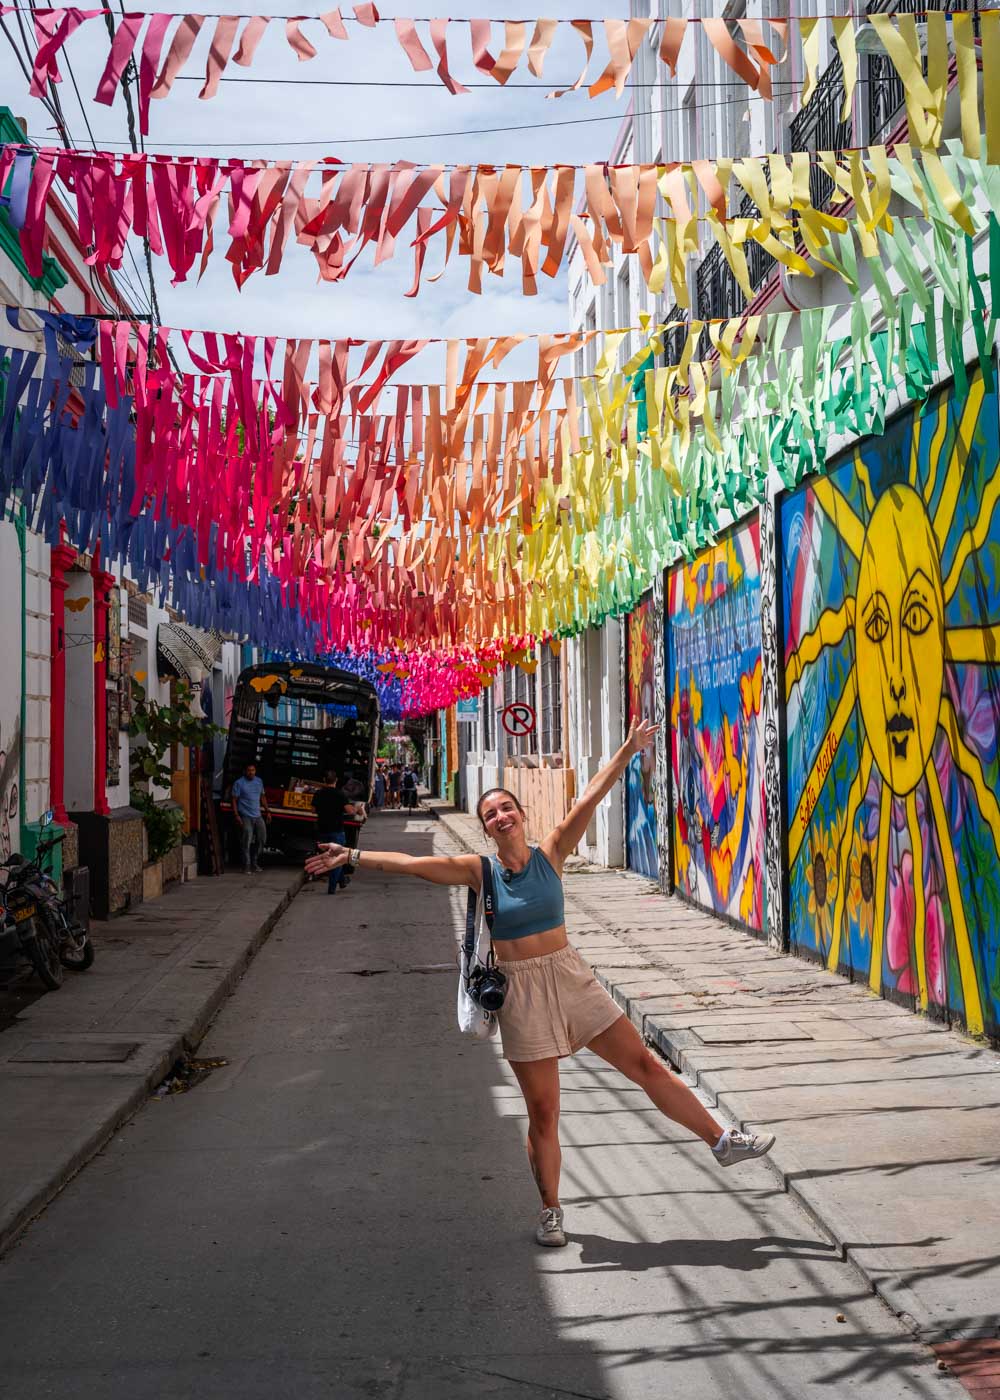 Sara making a silly pose in the middle of a street in Santa Marta historic center with rainbow colored decorations above.